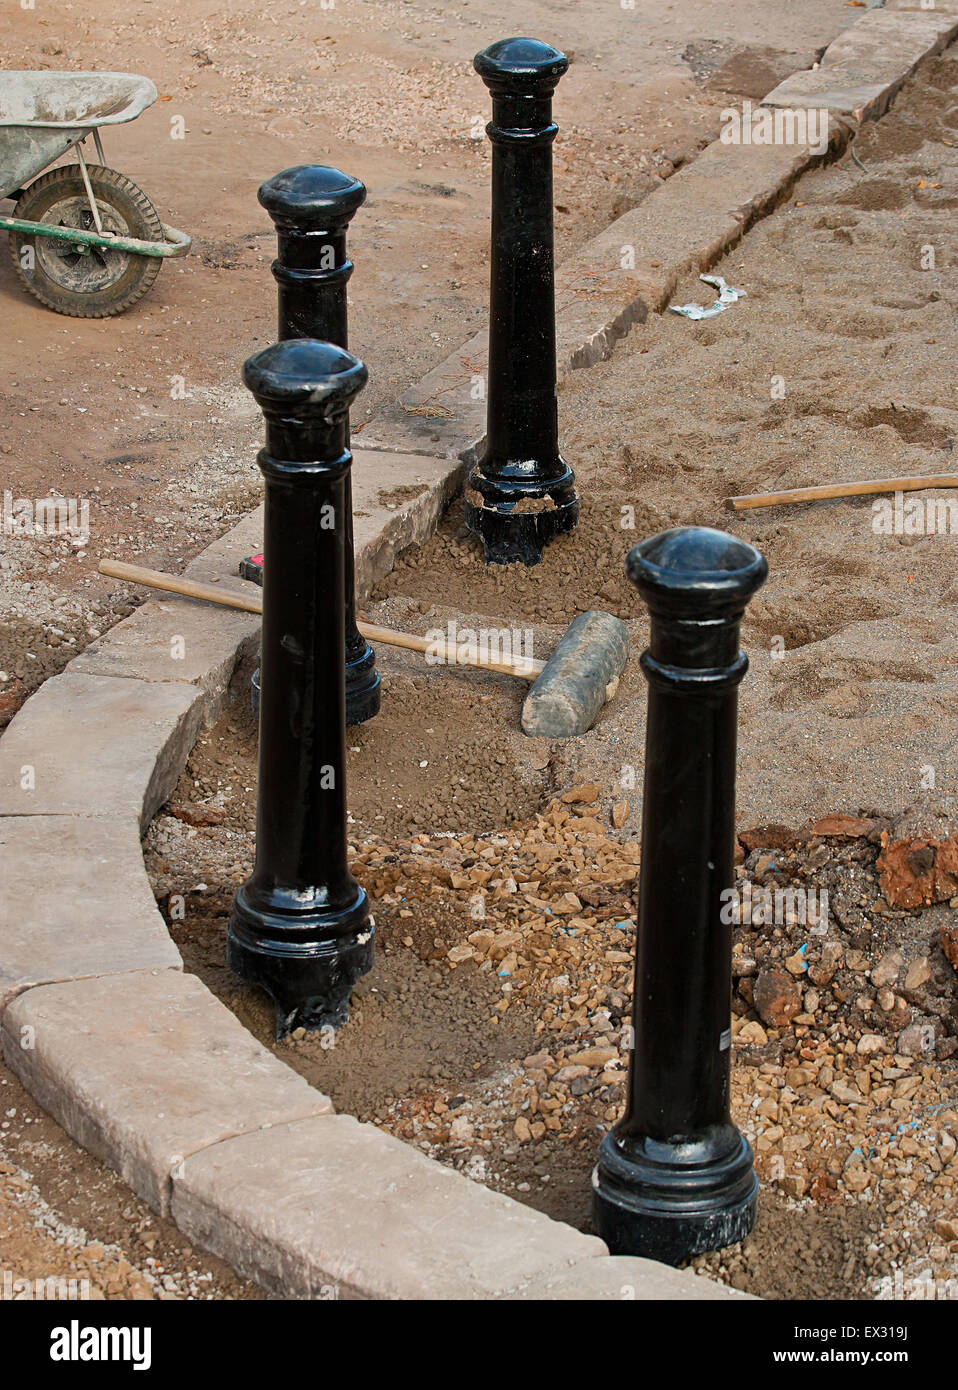 Cannon Cast Iron Pavement Bollards a Popular Street Furniture used in urban design to offer Pedestrian protection from vehicles. Stock Photo